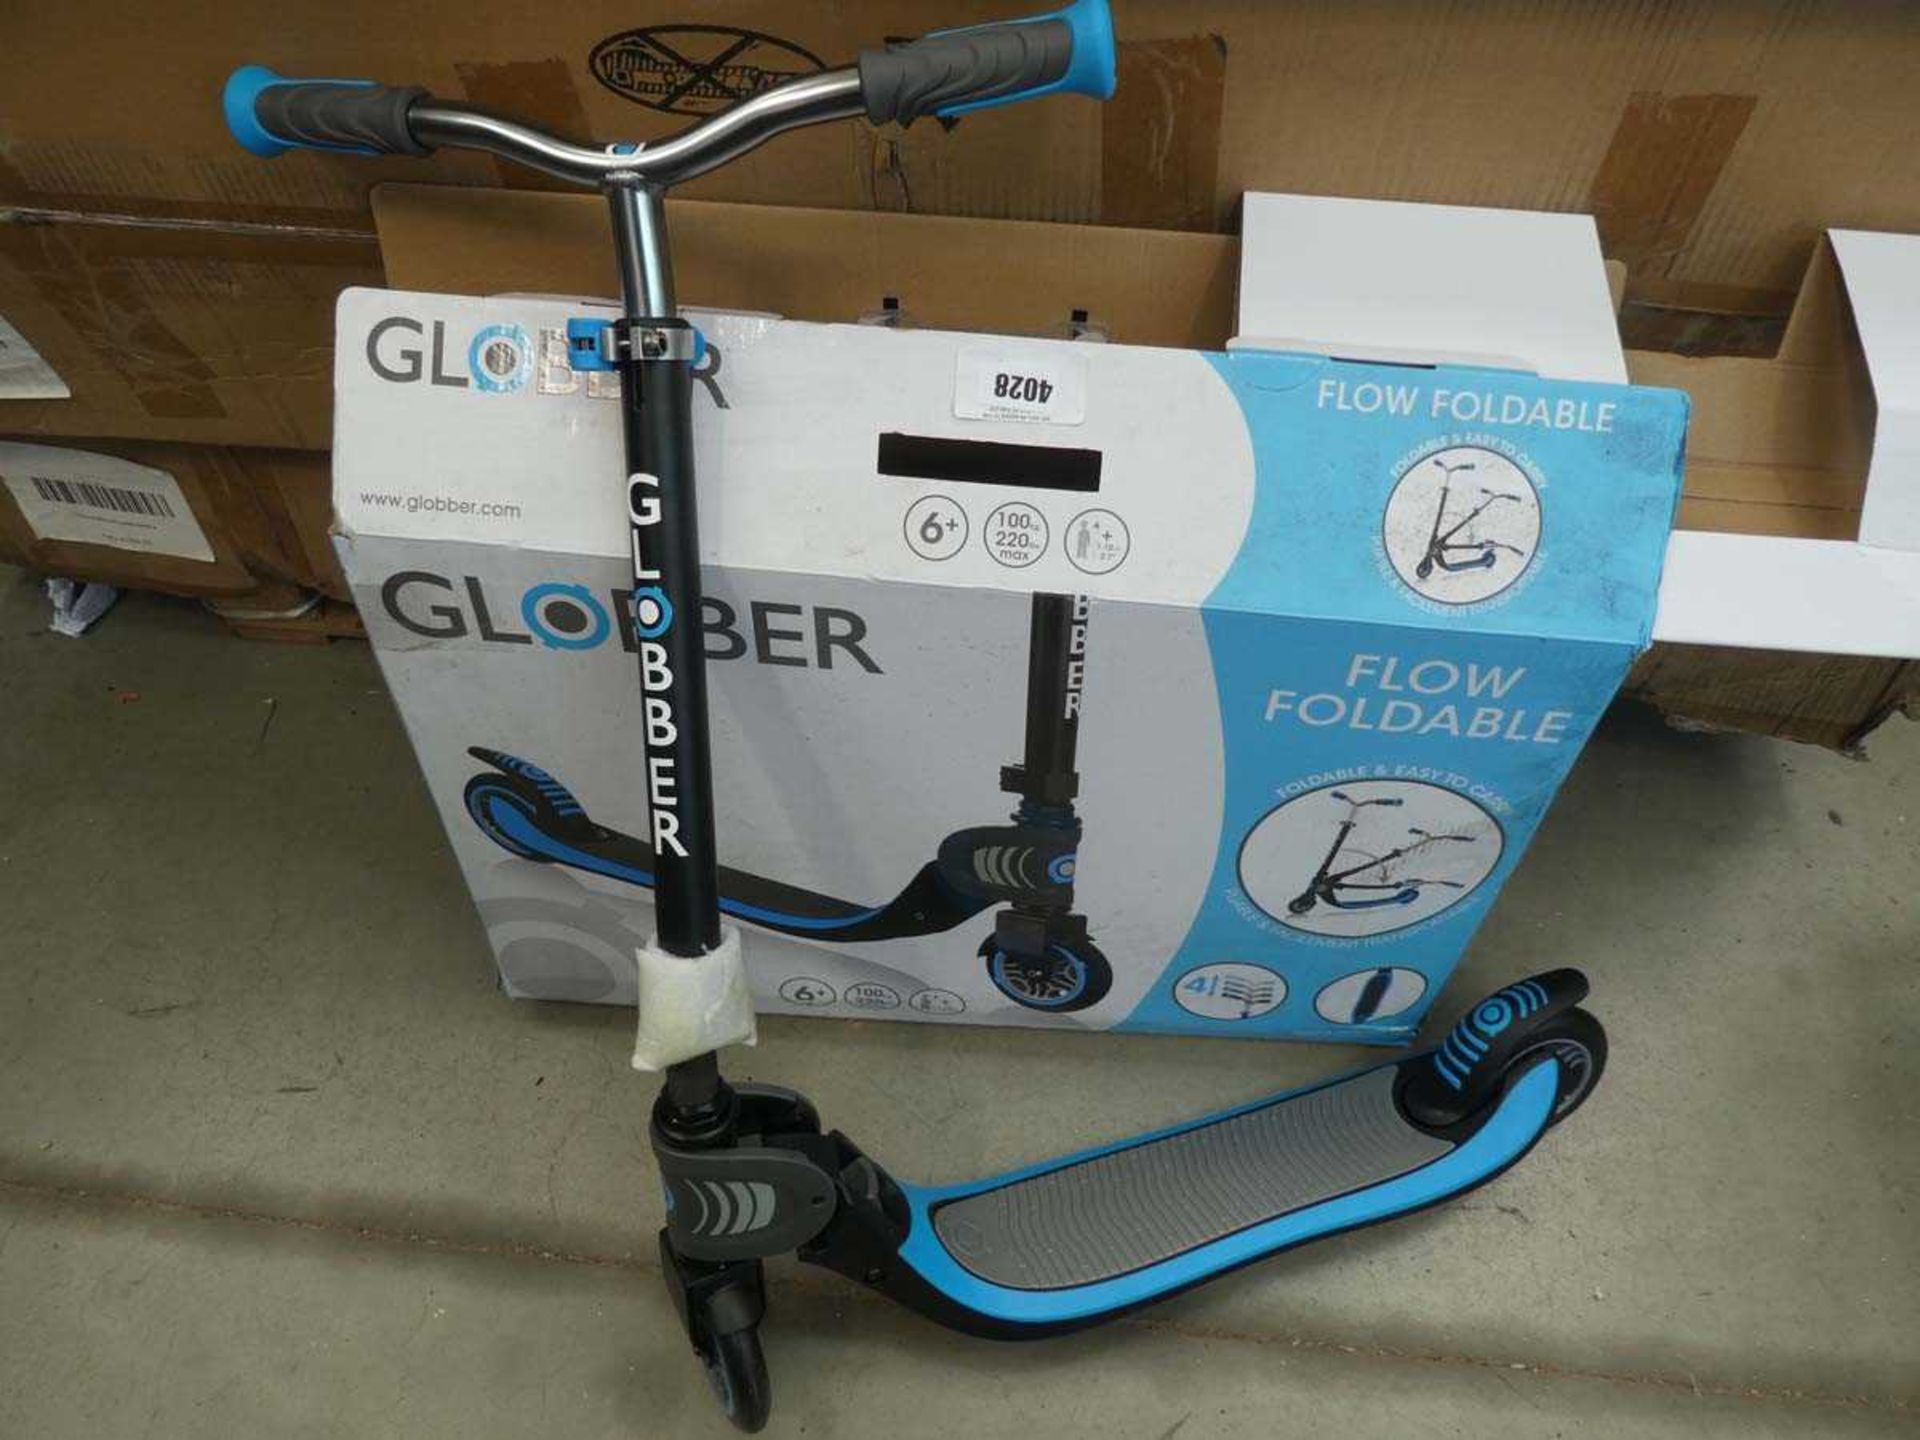 Small Globber boxed scooter